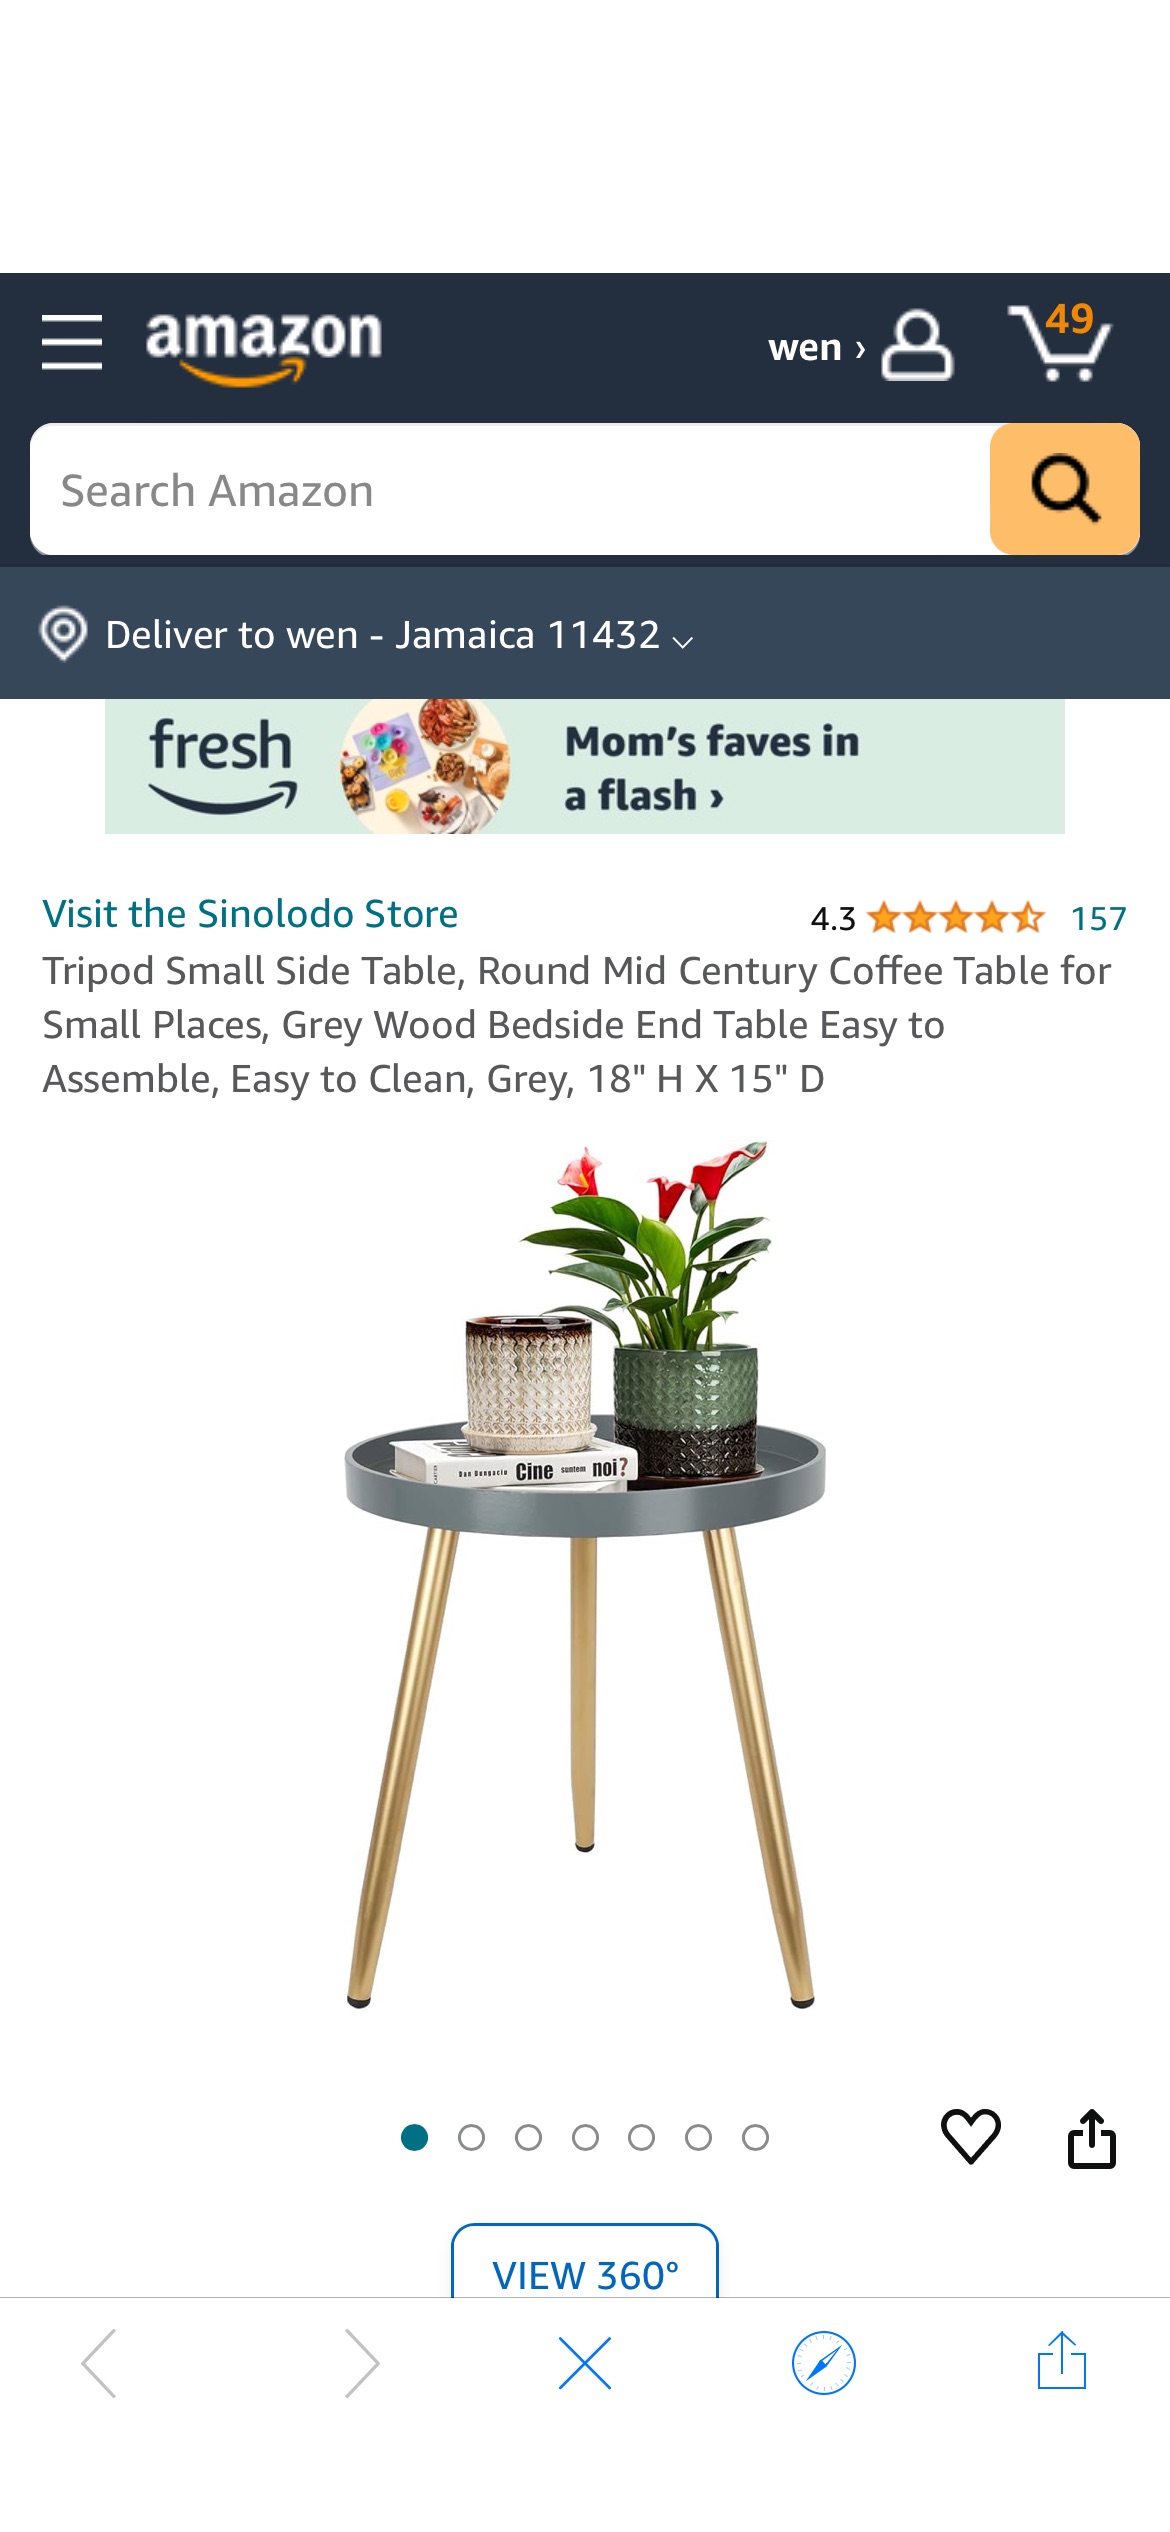 Amazon.com: Tripod Small Side Table, Round Mid Century Coffee Table for Small Places, Grey Wood Bedside End Table Easy to Assemble, Easy to Clean, Grey, 18" H X 15" D : Home & Kitchen